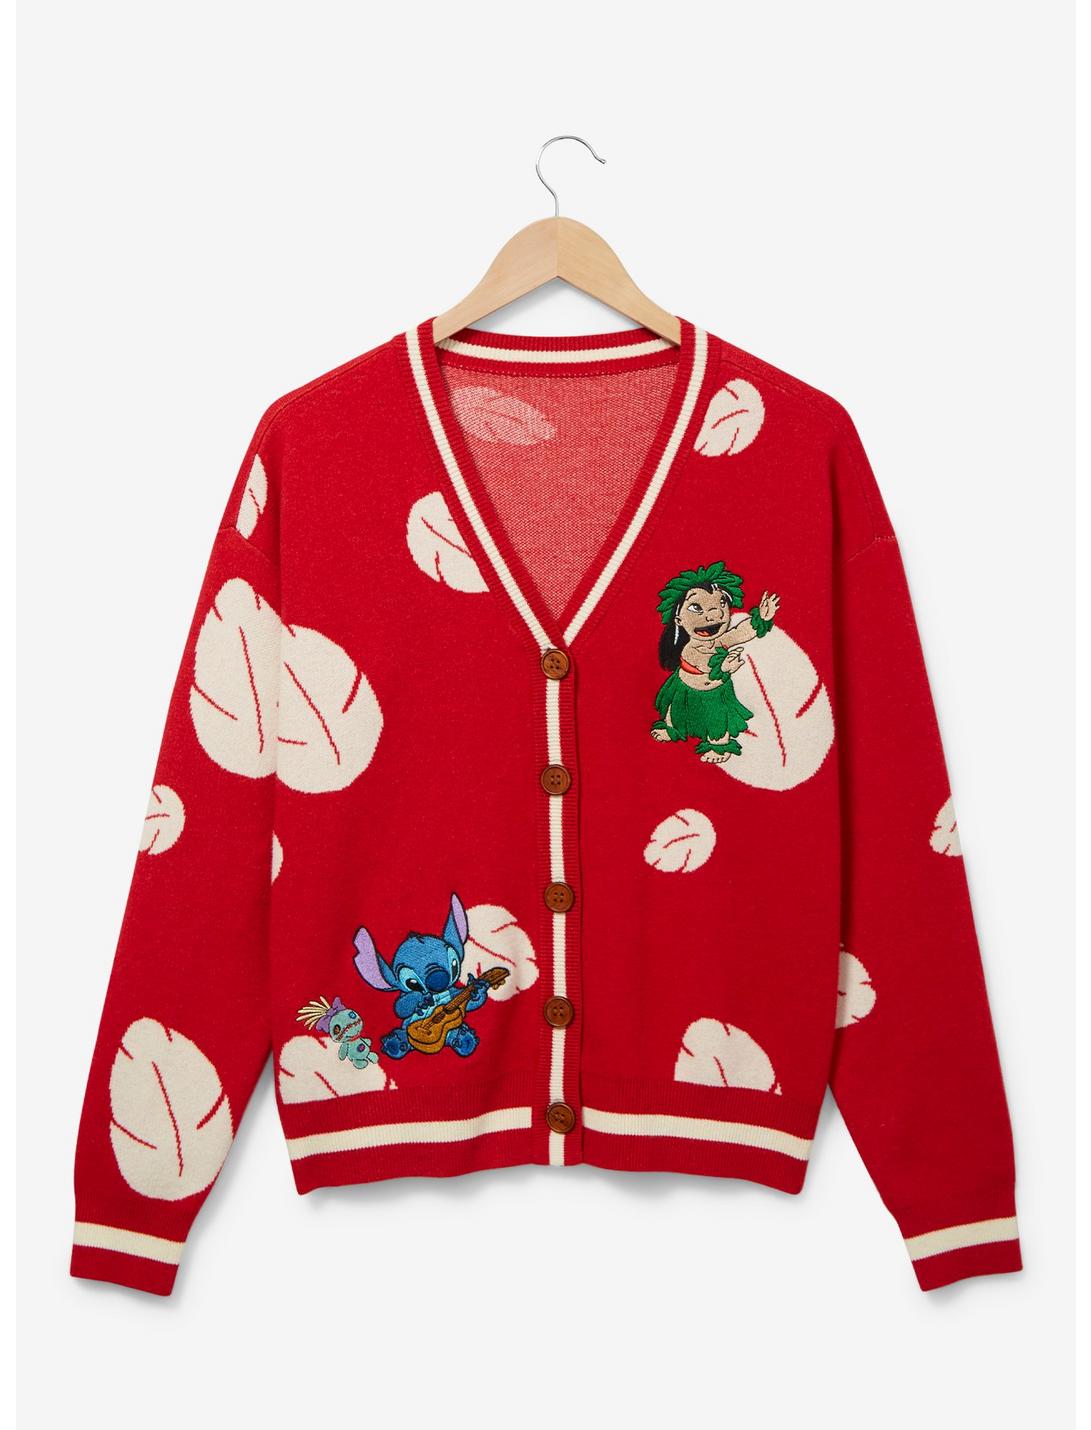 Disney Lilo & Stitch Women’s Plus Size Knit Cardigan - BoxLunch Exclusive, RED, hi-res